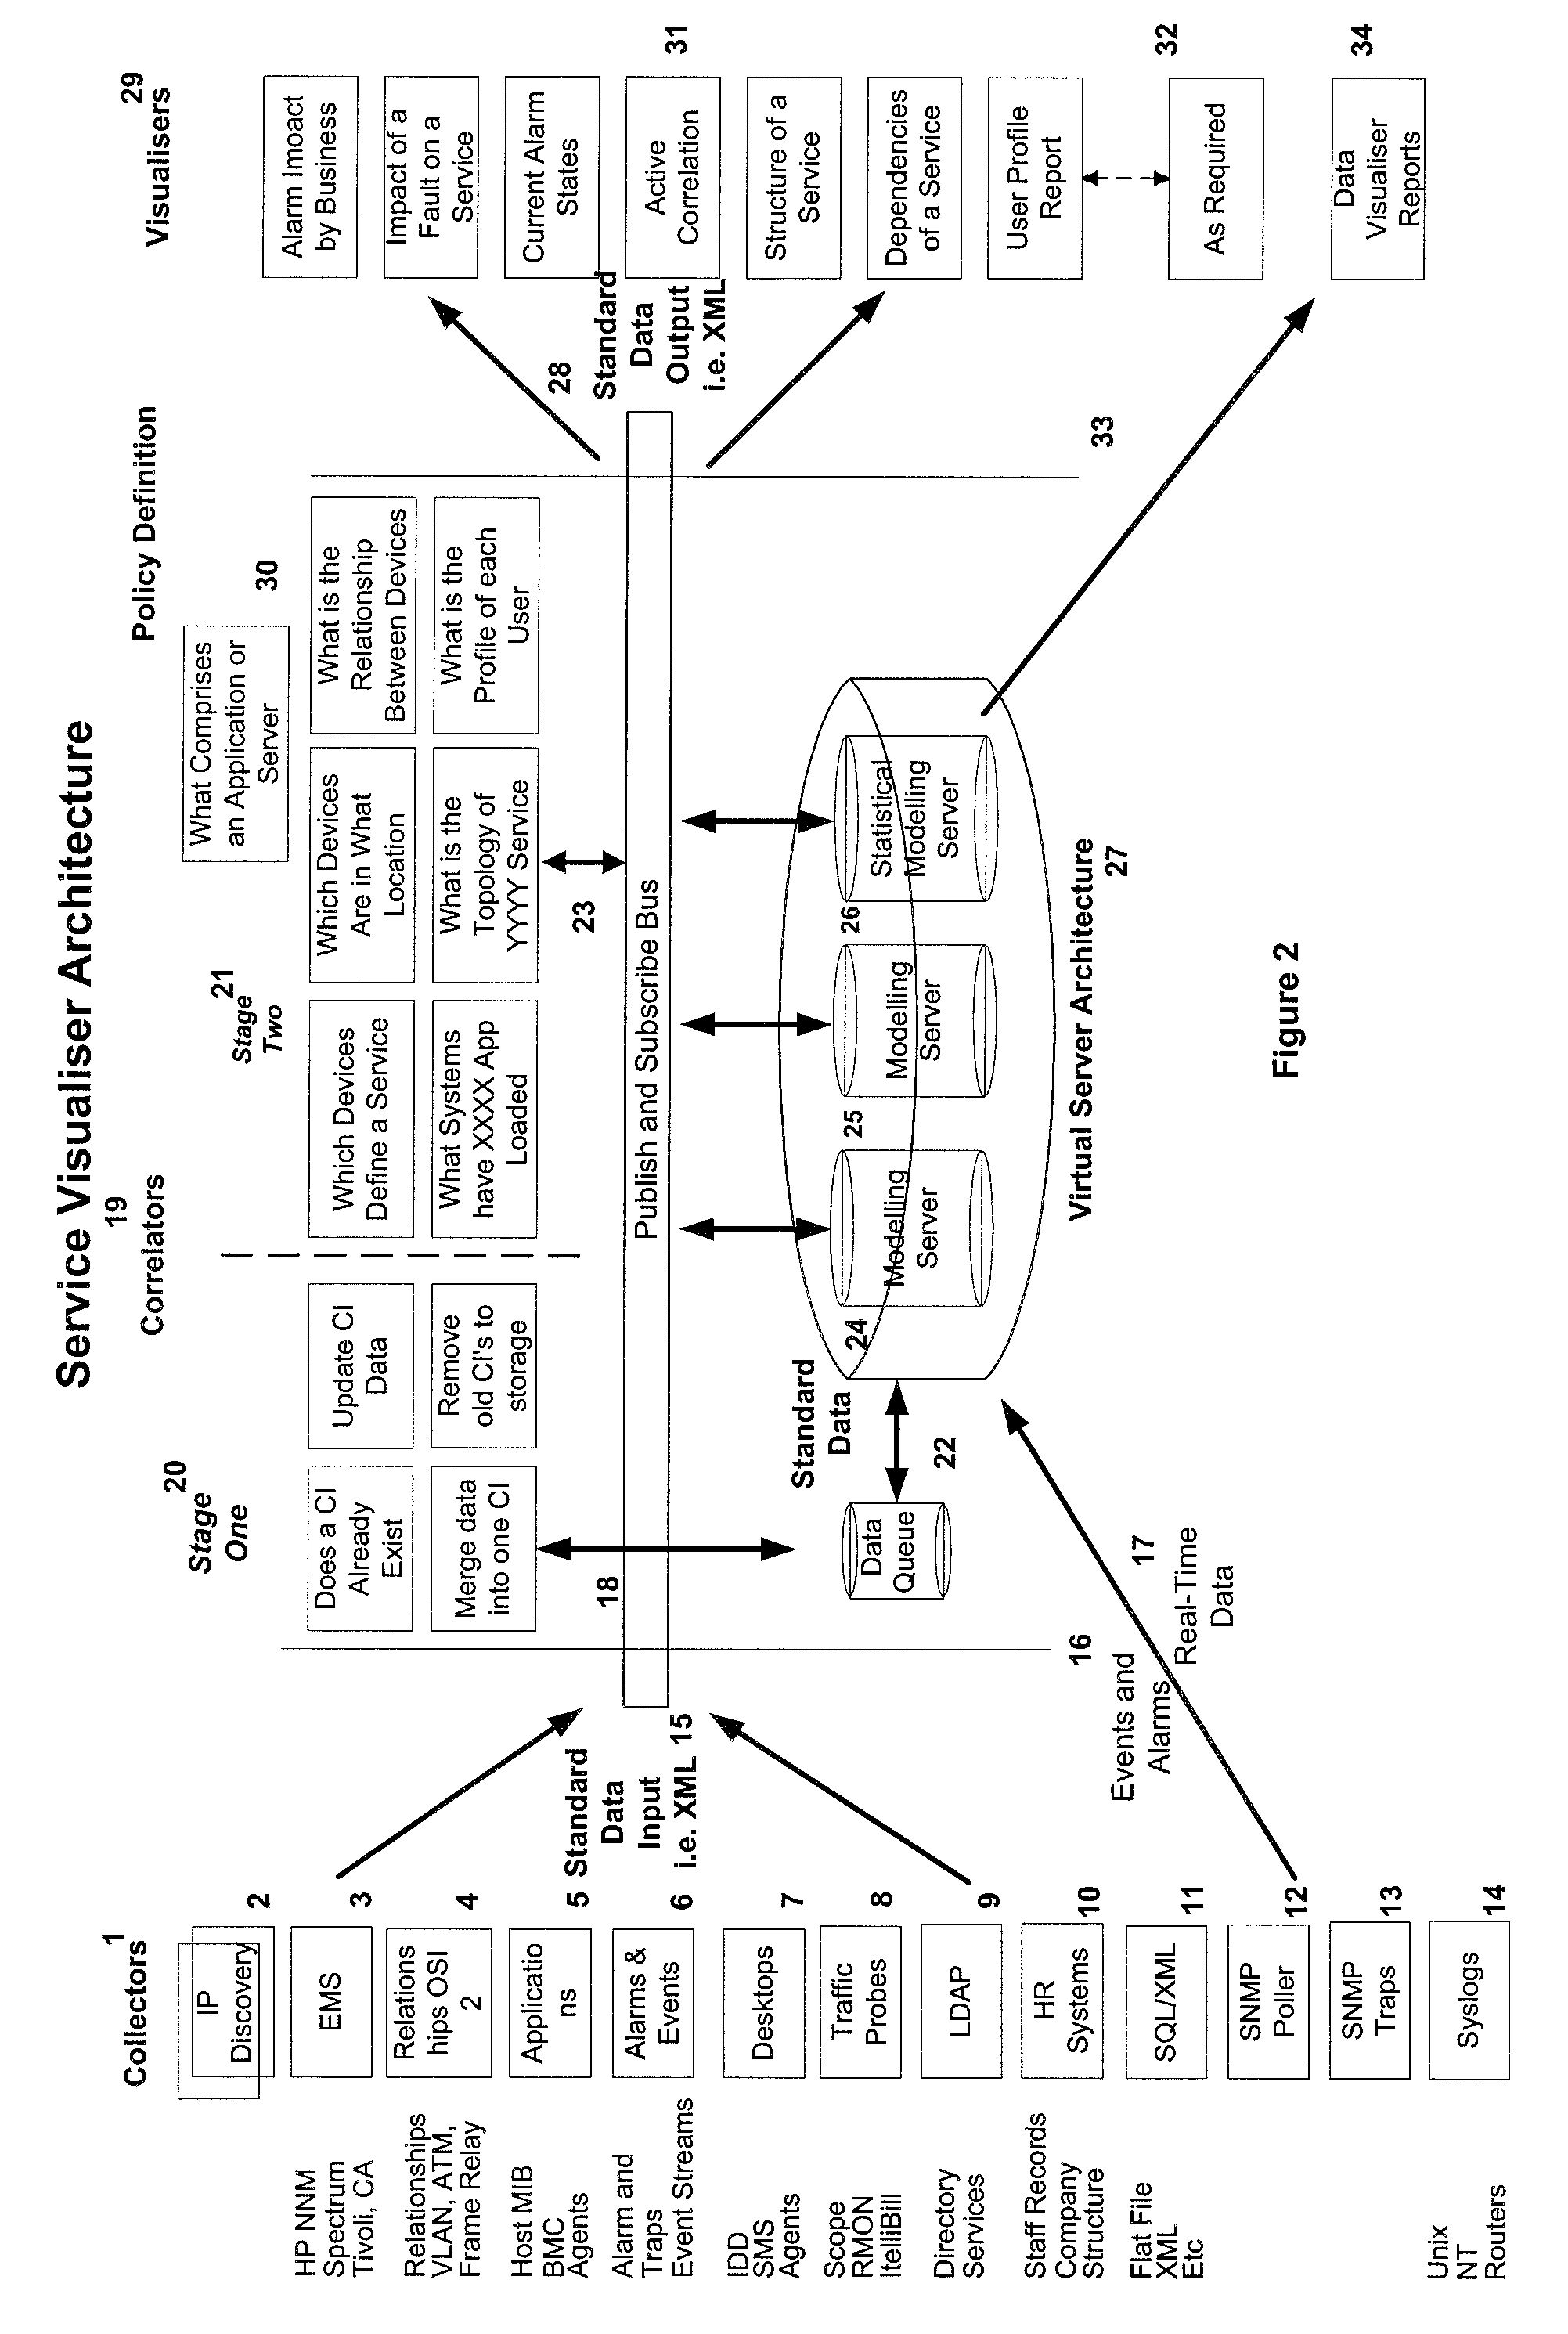 Automated application discovery and analysis system and method